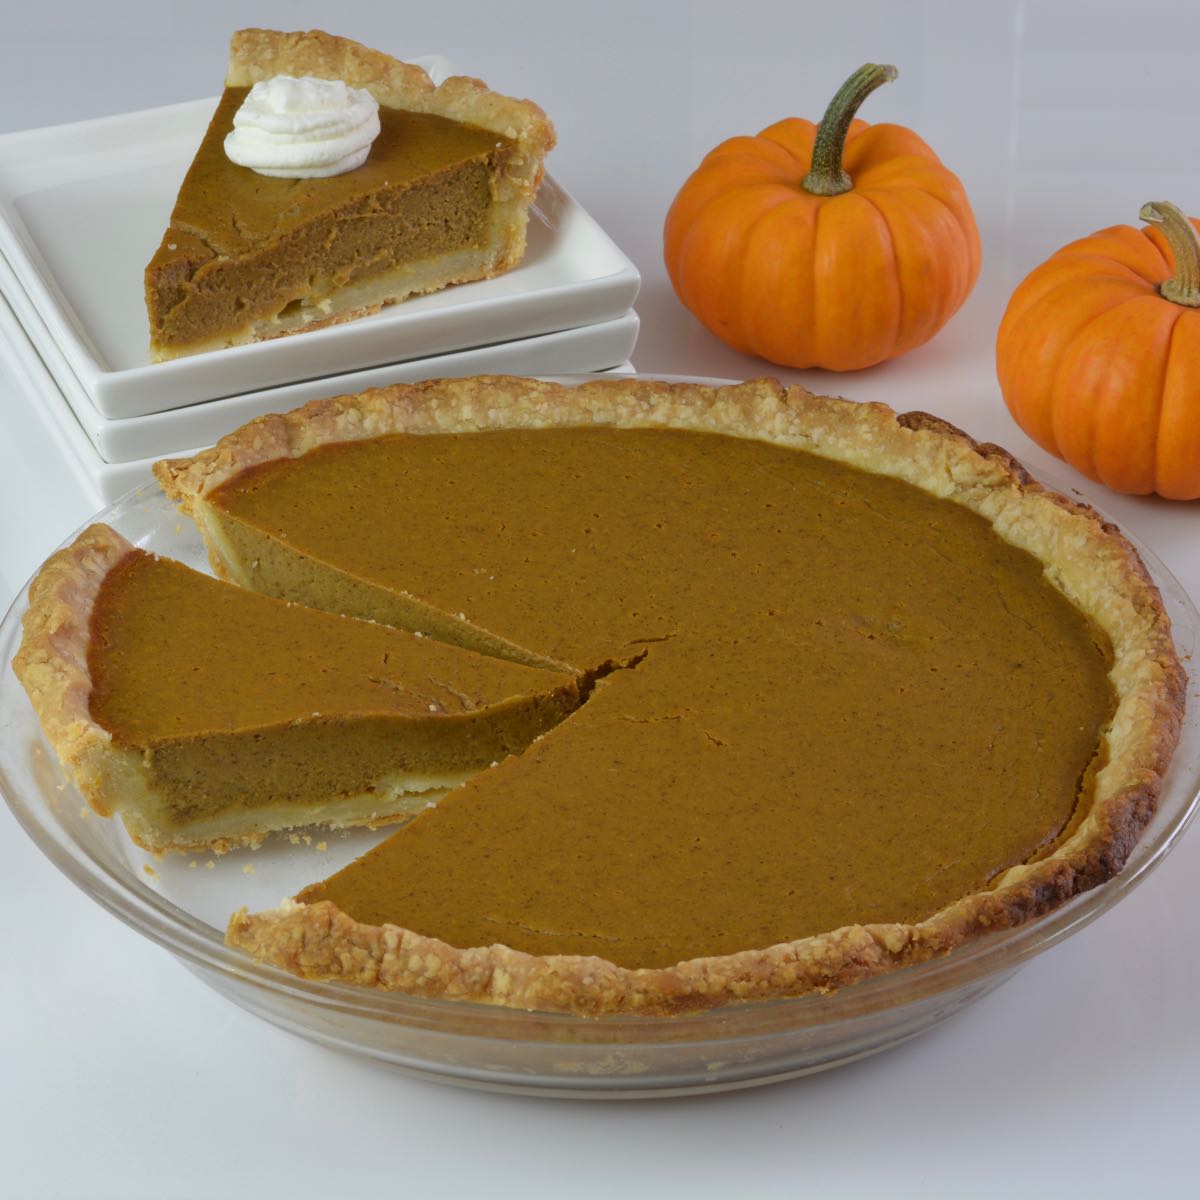 A whole gluten free Pumpkin Pie with one piece placed on a plate and 2 mini pumpkins beside it.